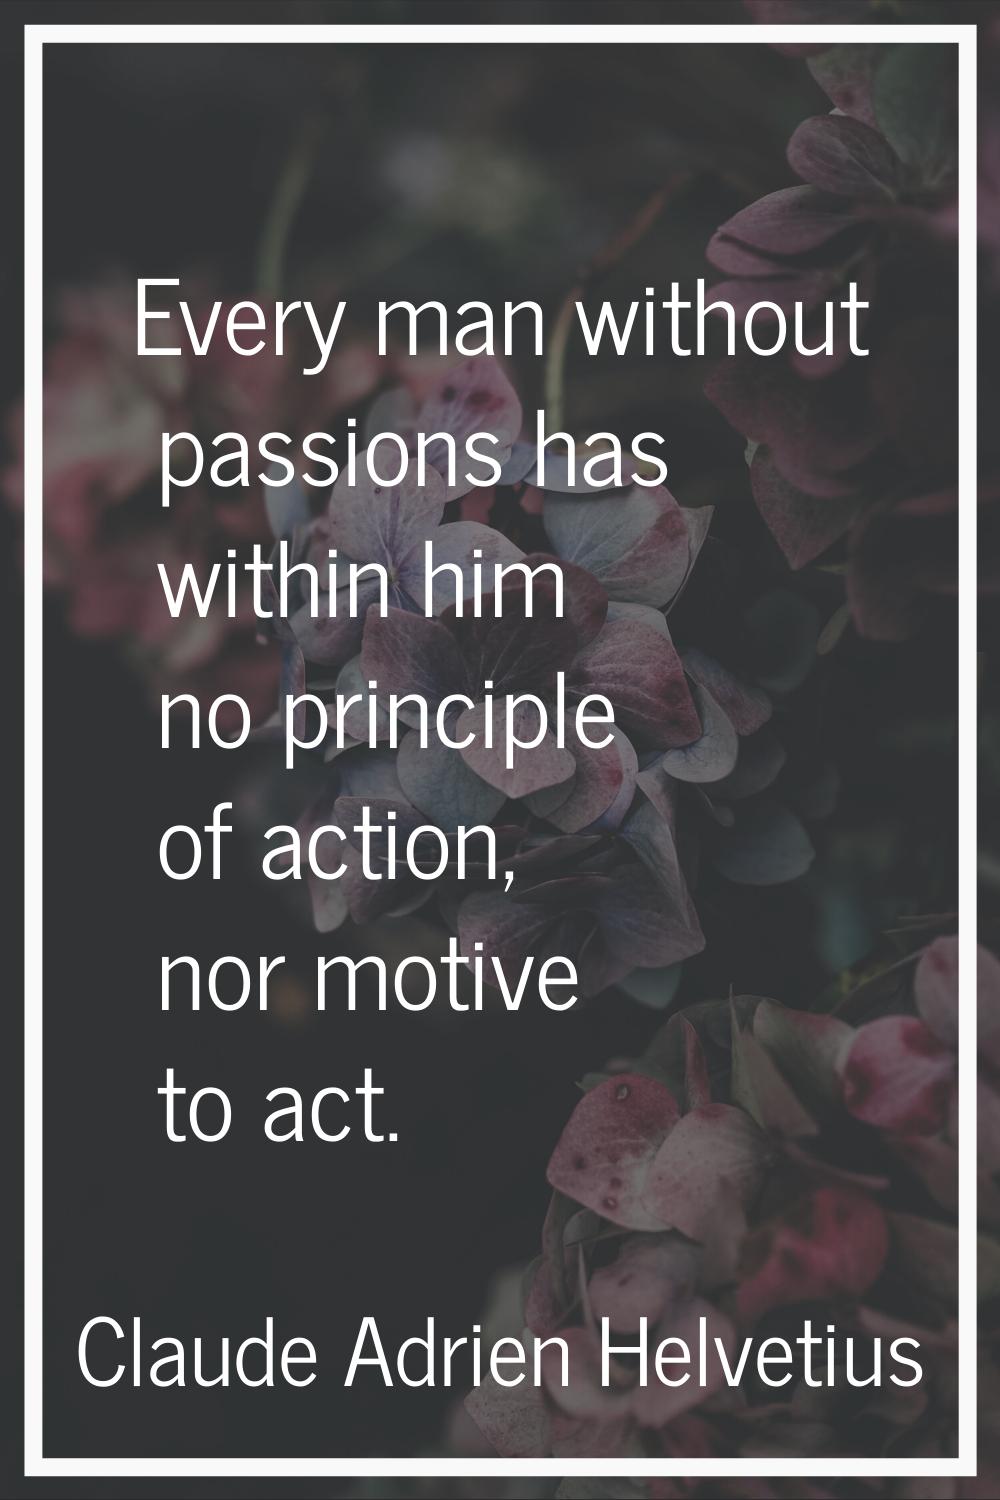 Every man without passions has within him no principle of action, nor motive to act.